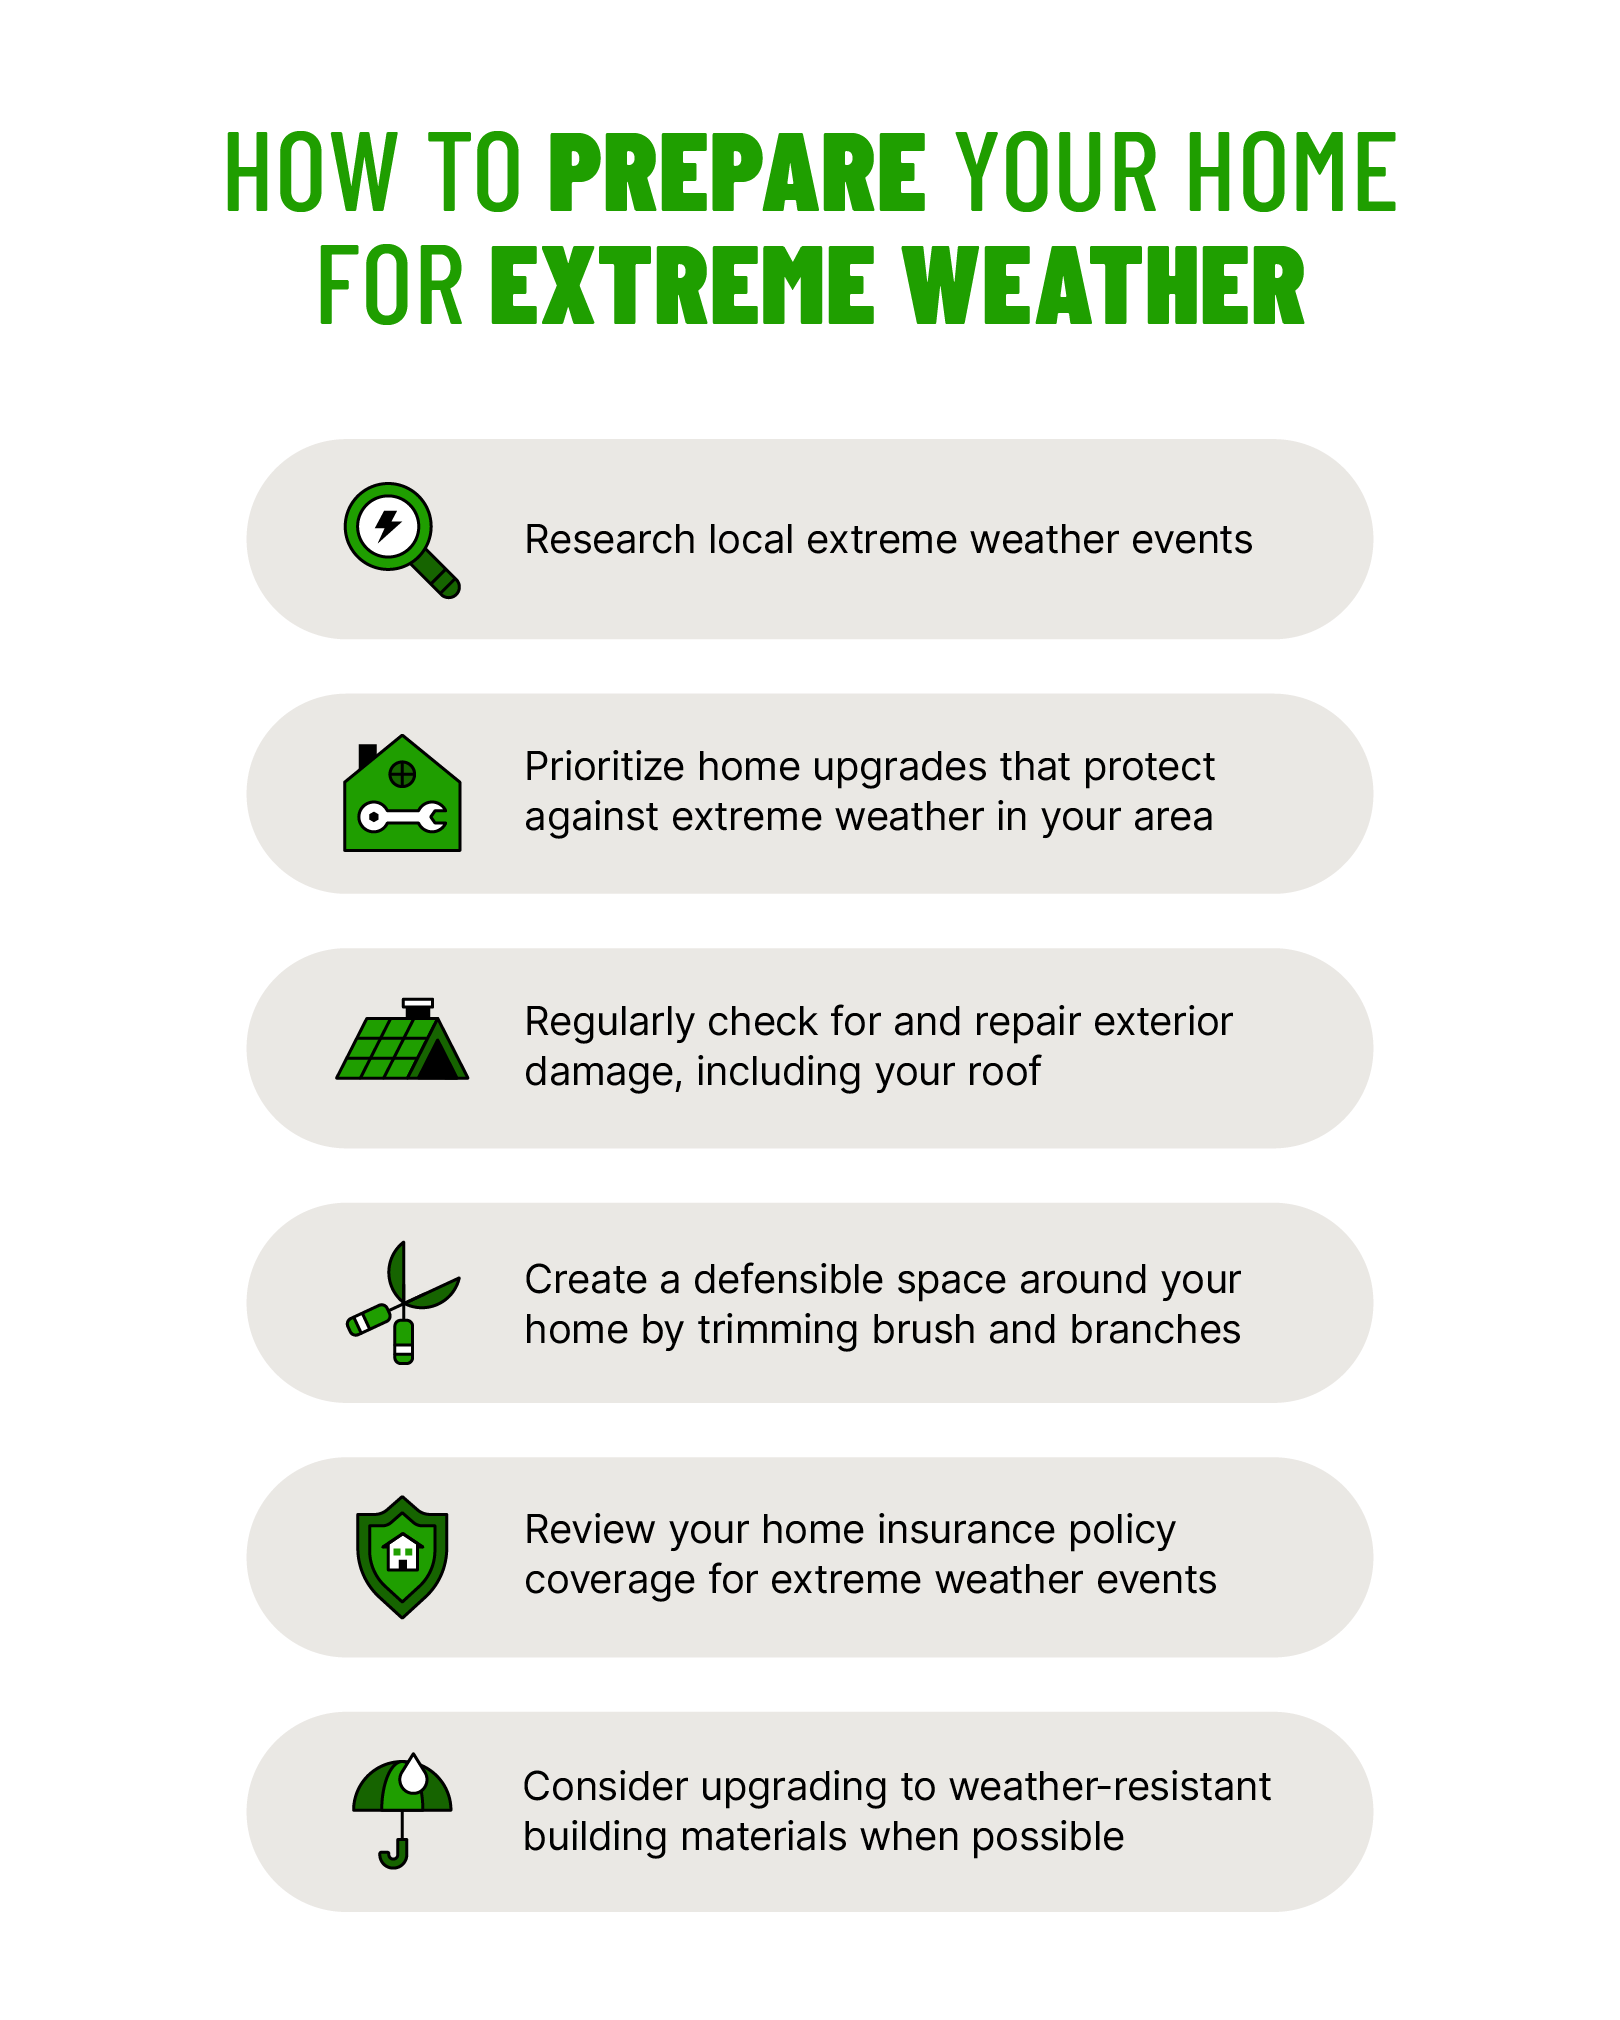 list of tips for preparing a home for extreme weather